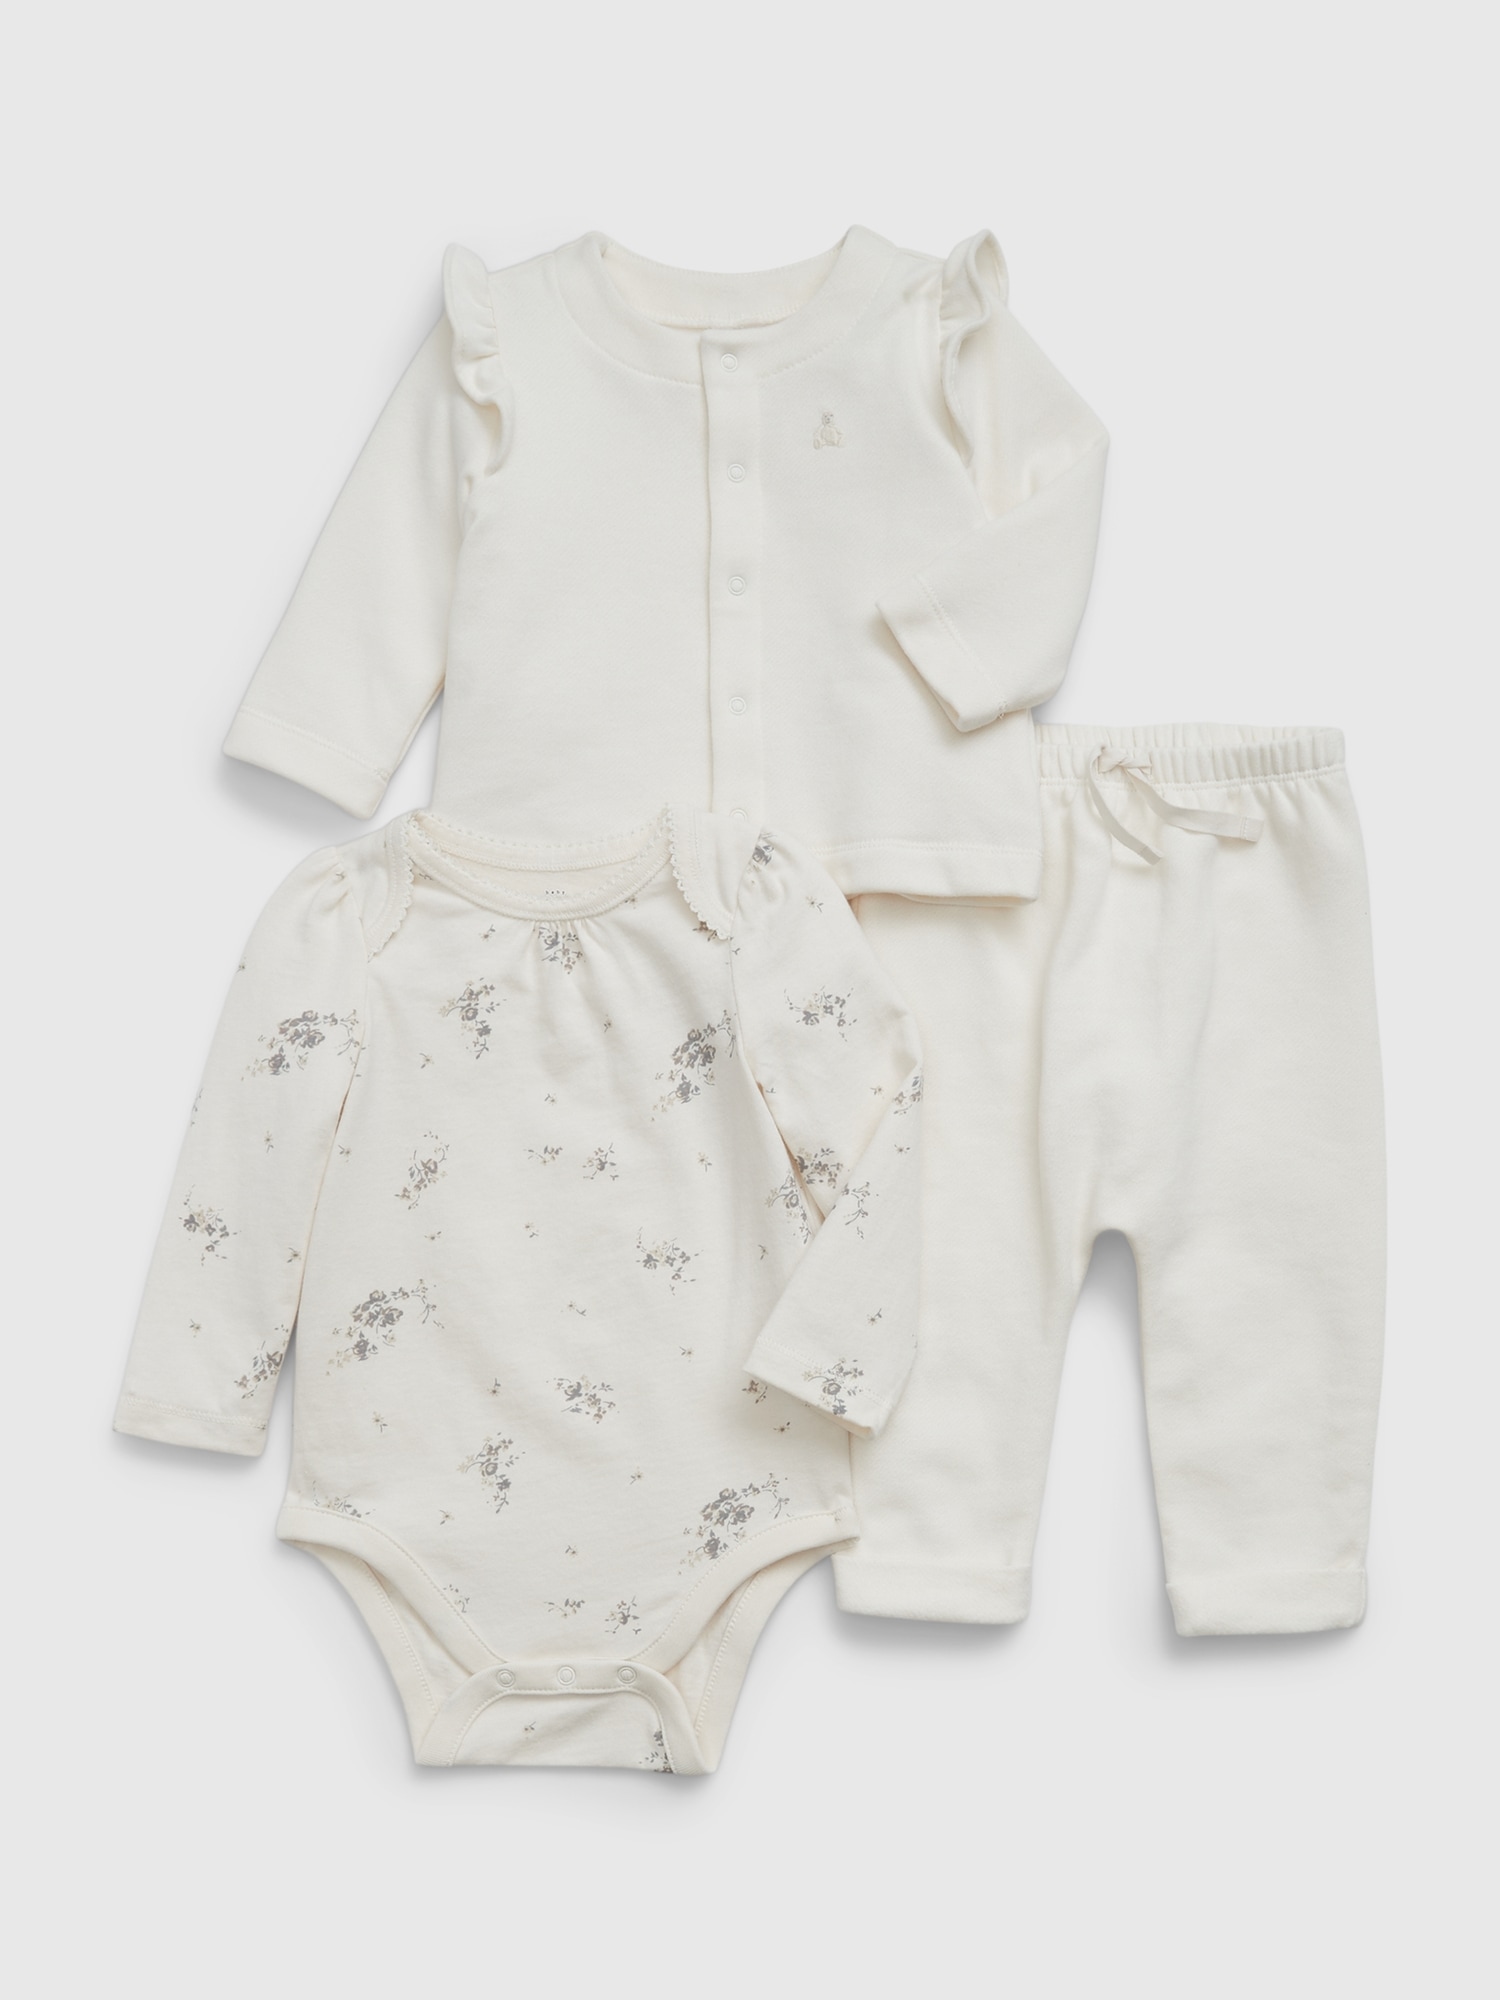 Baby First Favorites Three-Piece Outfit Set | Gap